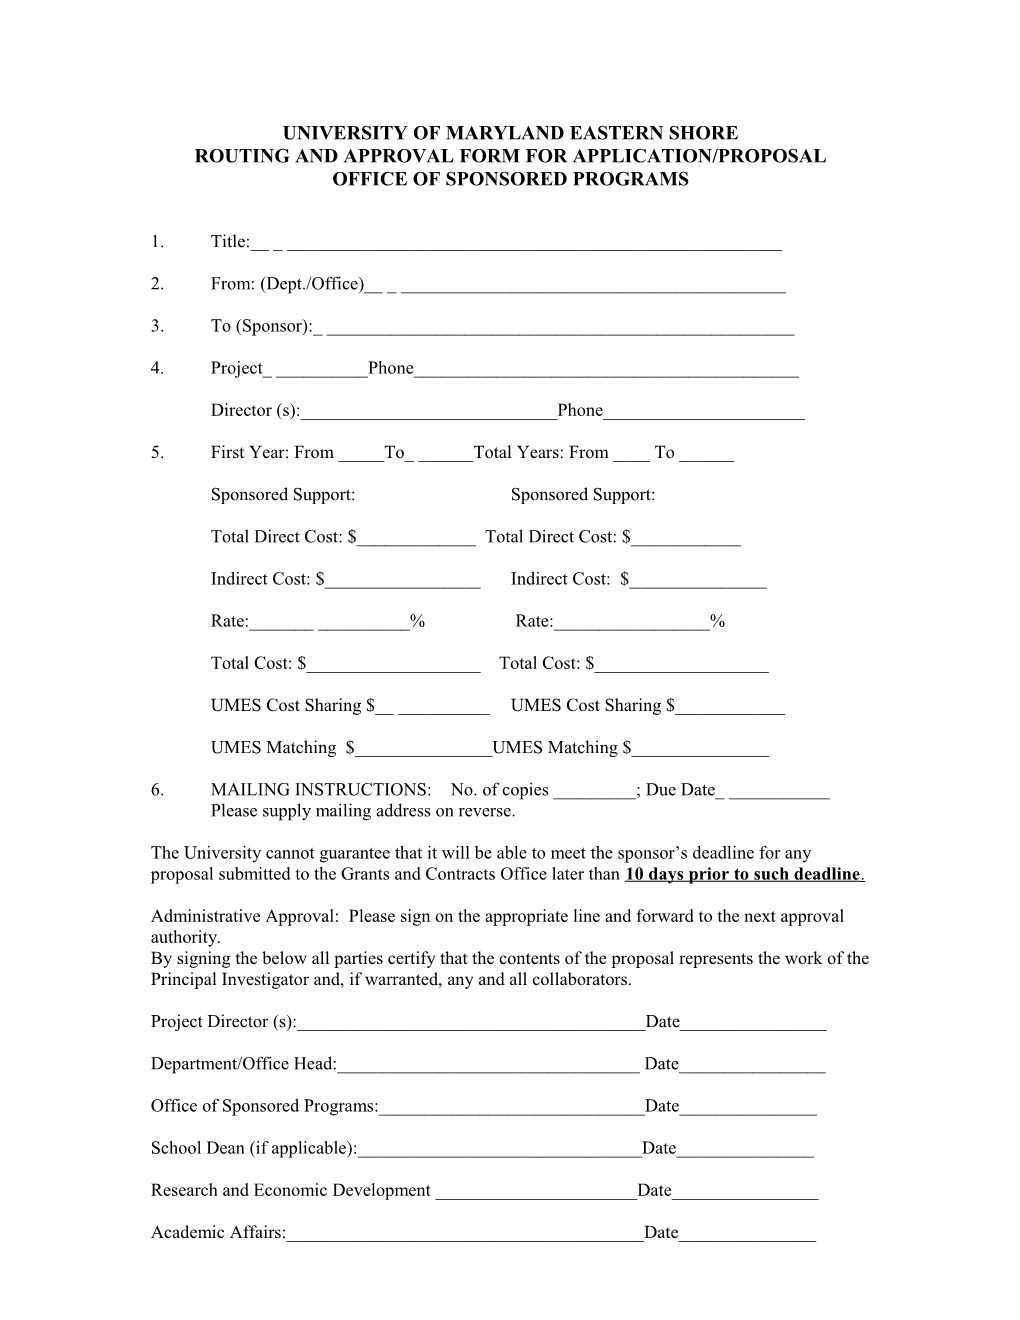 Routing and Approval Form for Application/Proposal